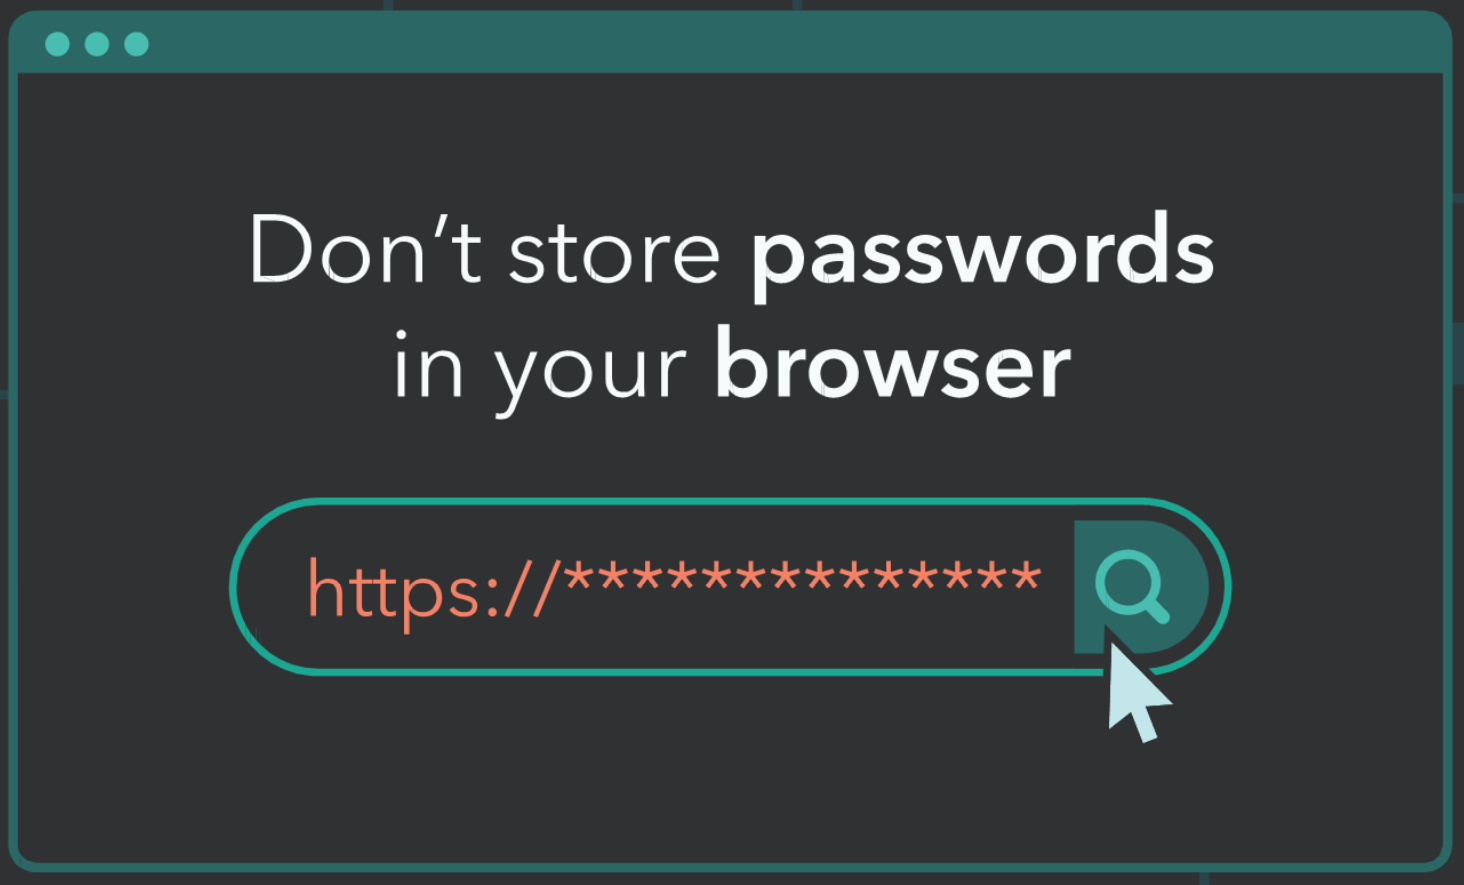 myki-don't store password to your browser